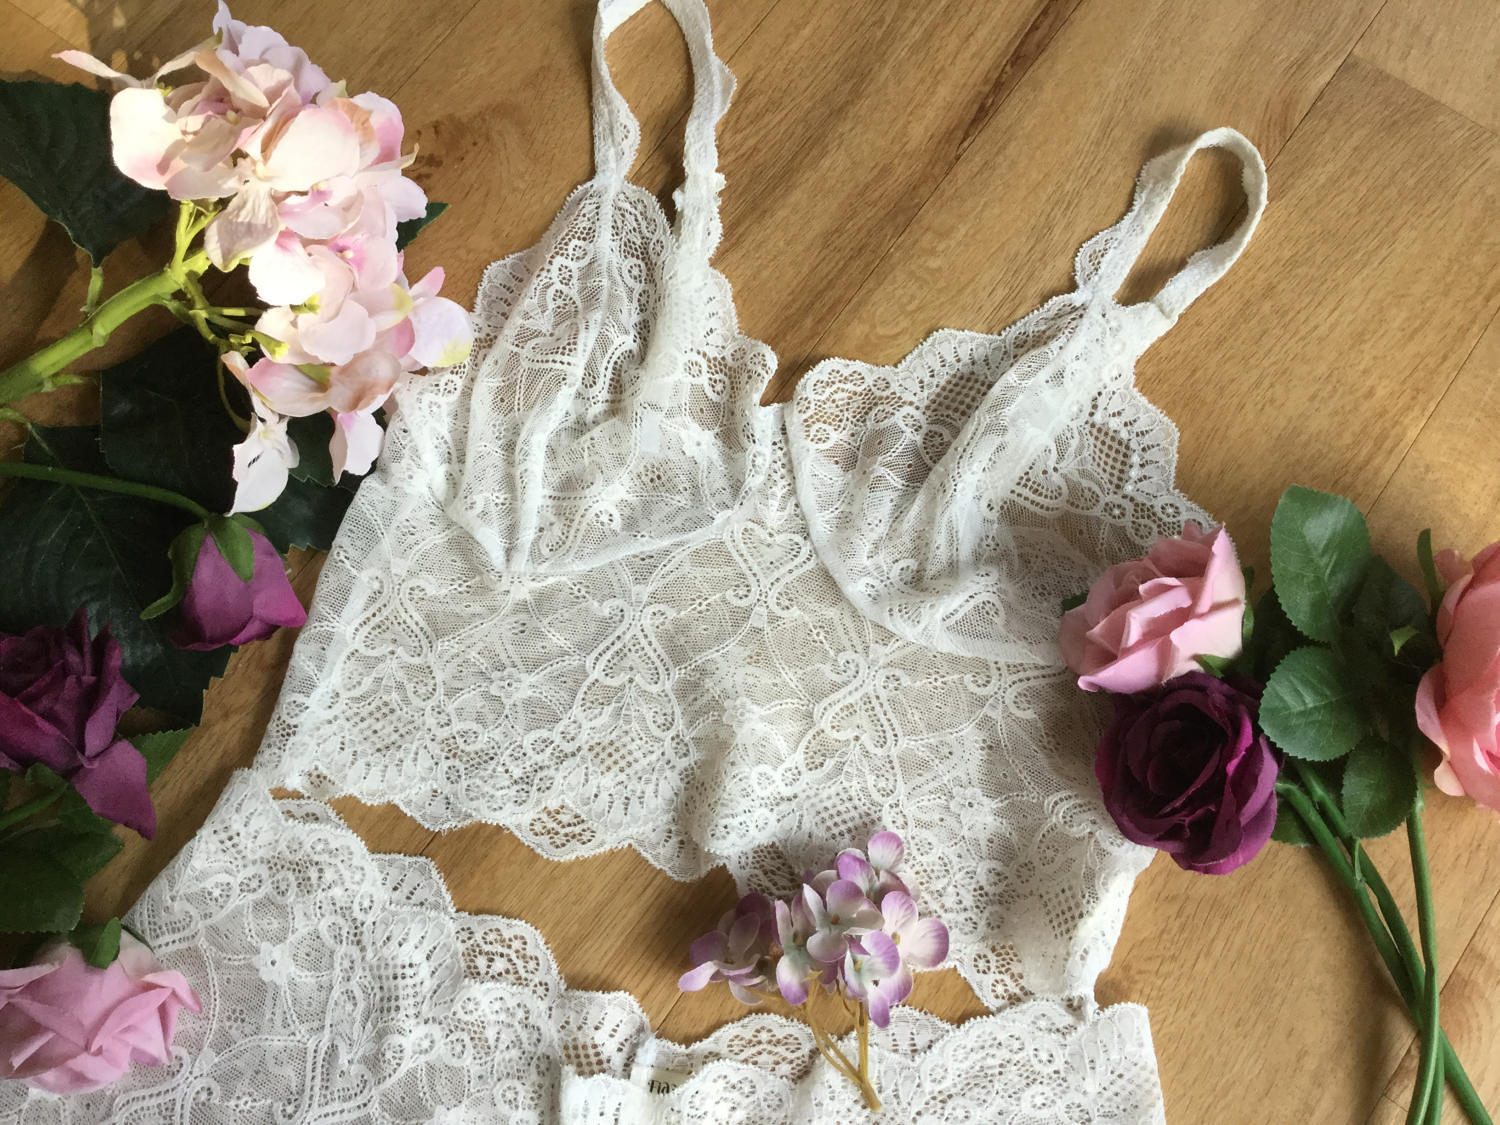 Floral sheer bralette in pretty white lace by Fidditch designs | Etsy